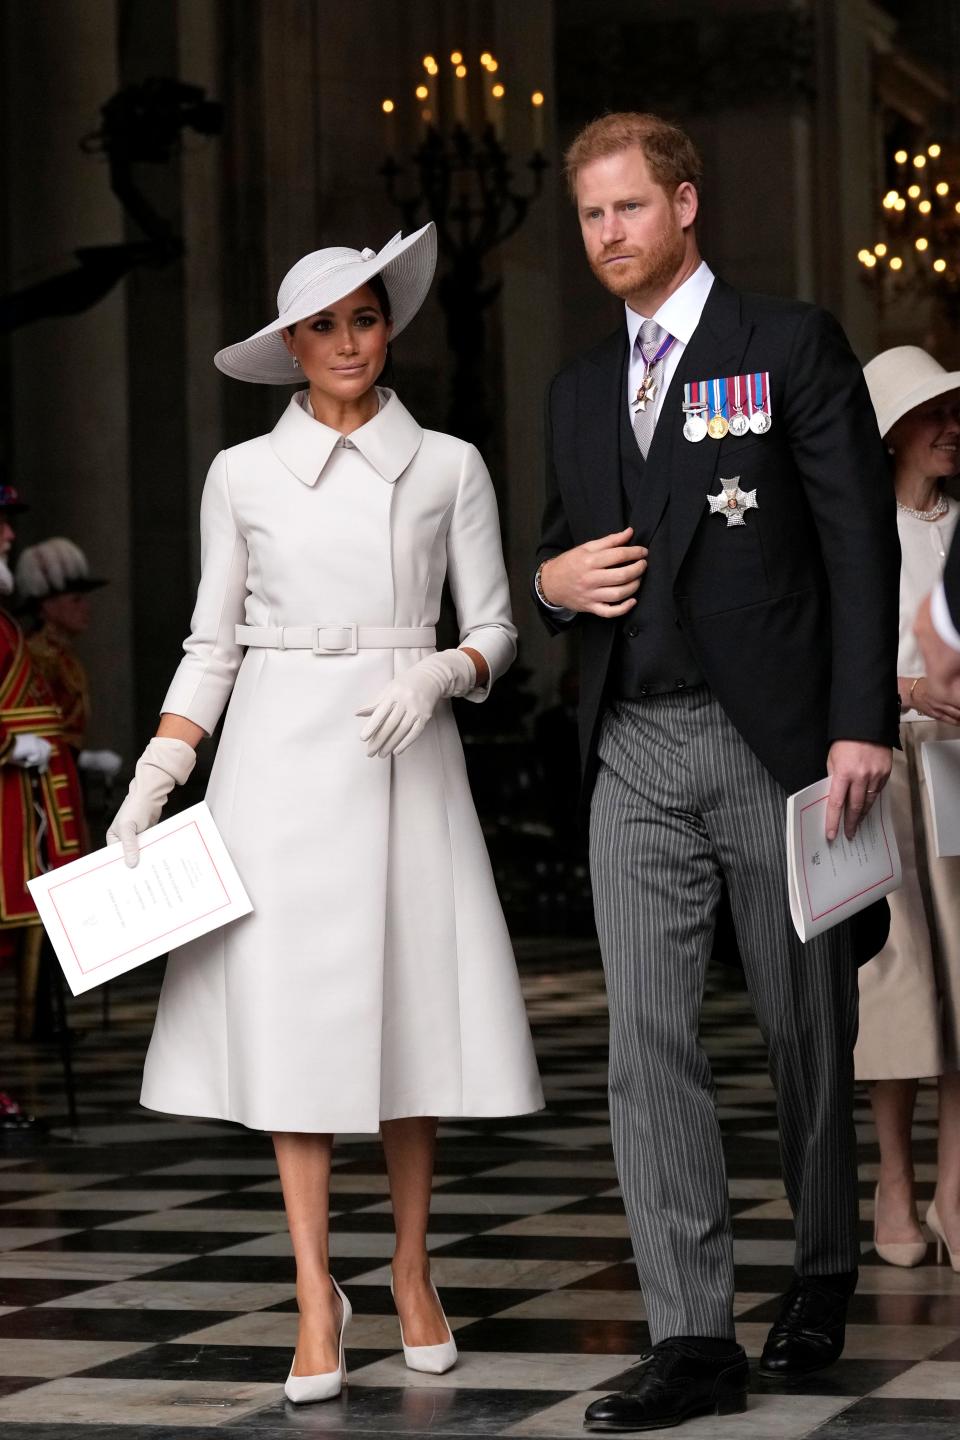 Prince Harry and Duchess Meghan of Sussex leave after a service at St Paul's Cathedral in London, on the second day of the Platinum Jubilee celebration of the 70-year reign of Queen Elizabeth II. Meghan wore a grey/beige ensemble featuring a Dior trench coat and a Dior straw hat.